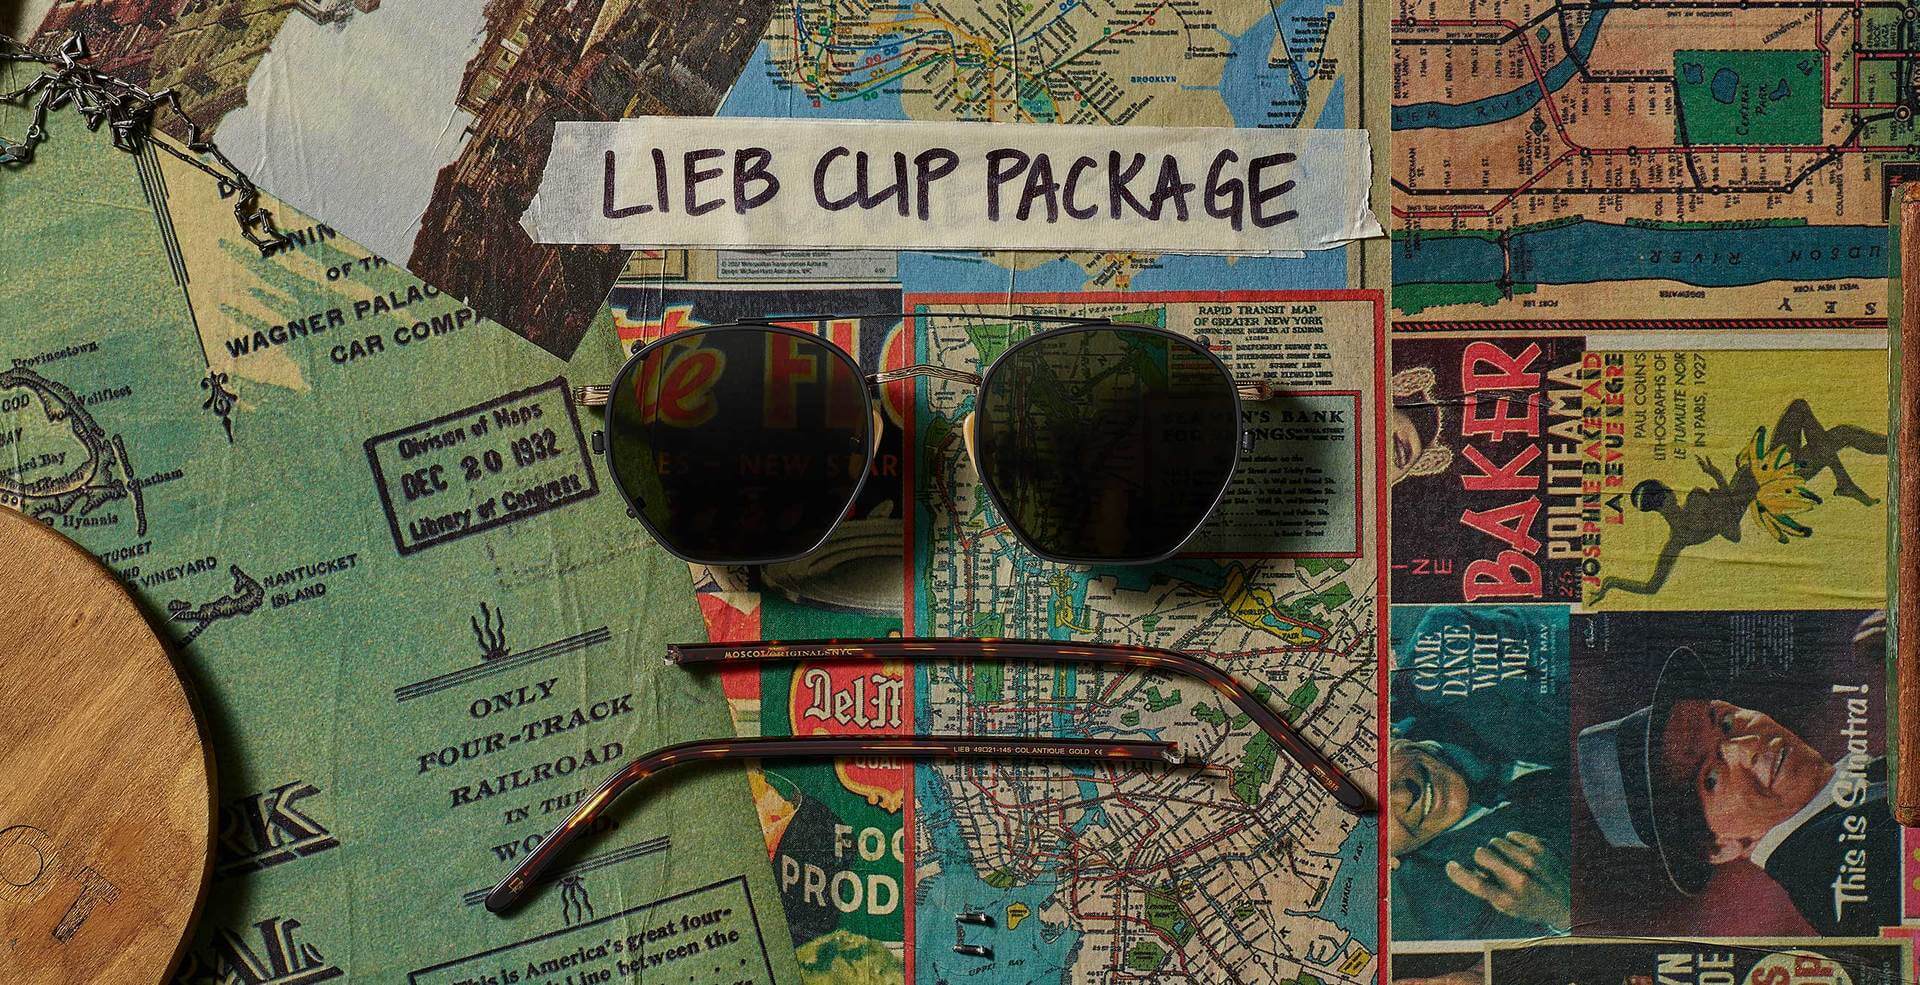 The LIEB CLIP PACKAGE